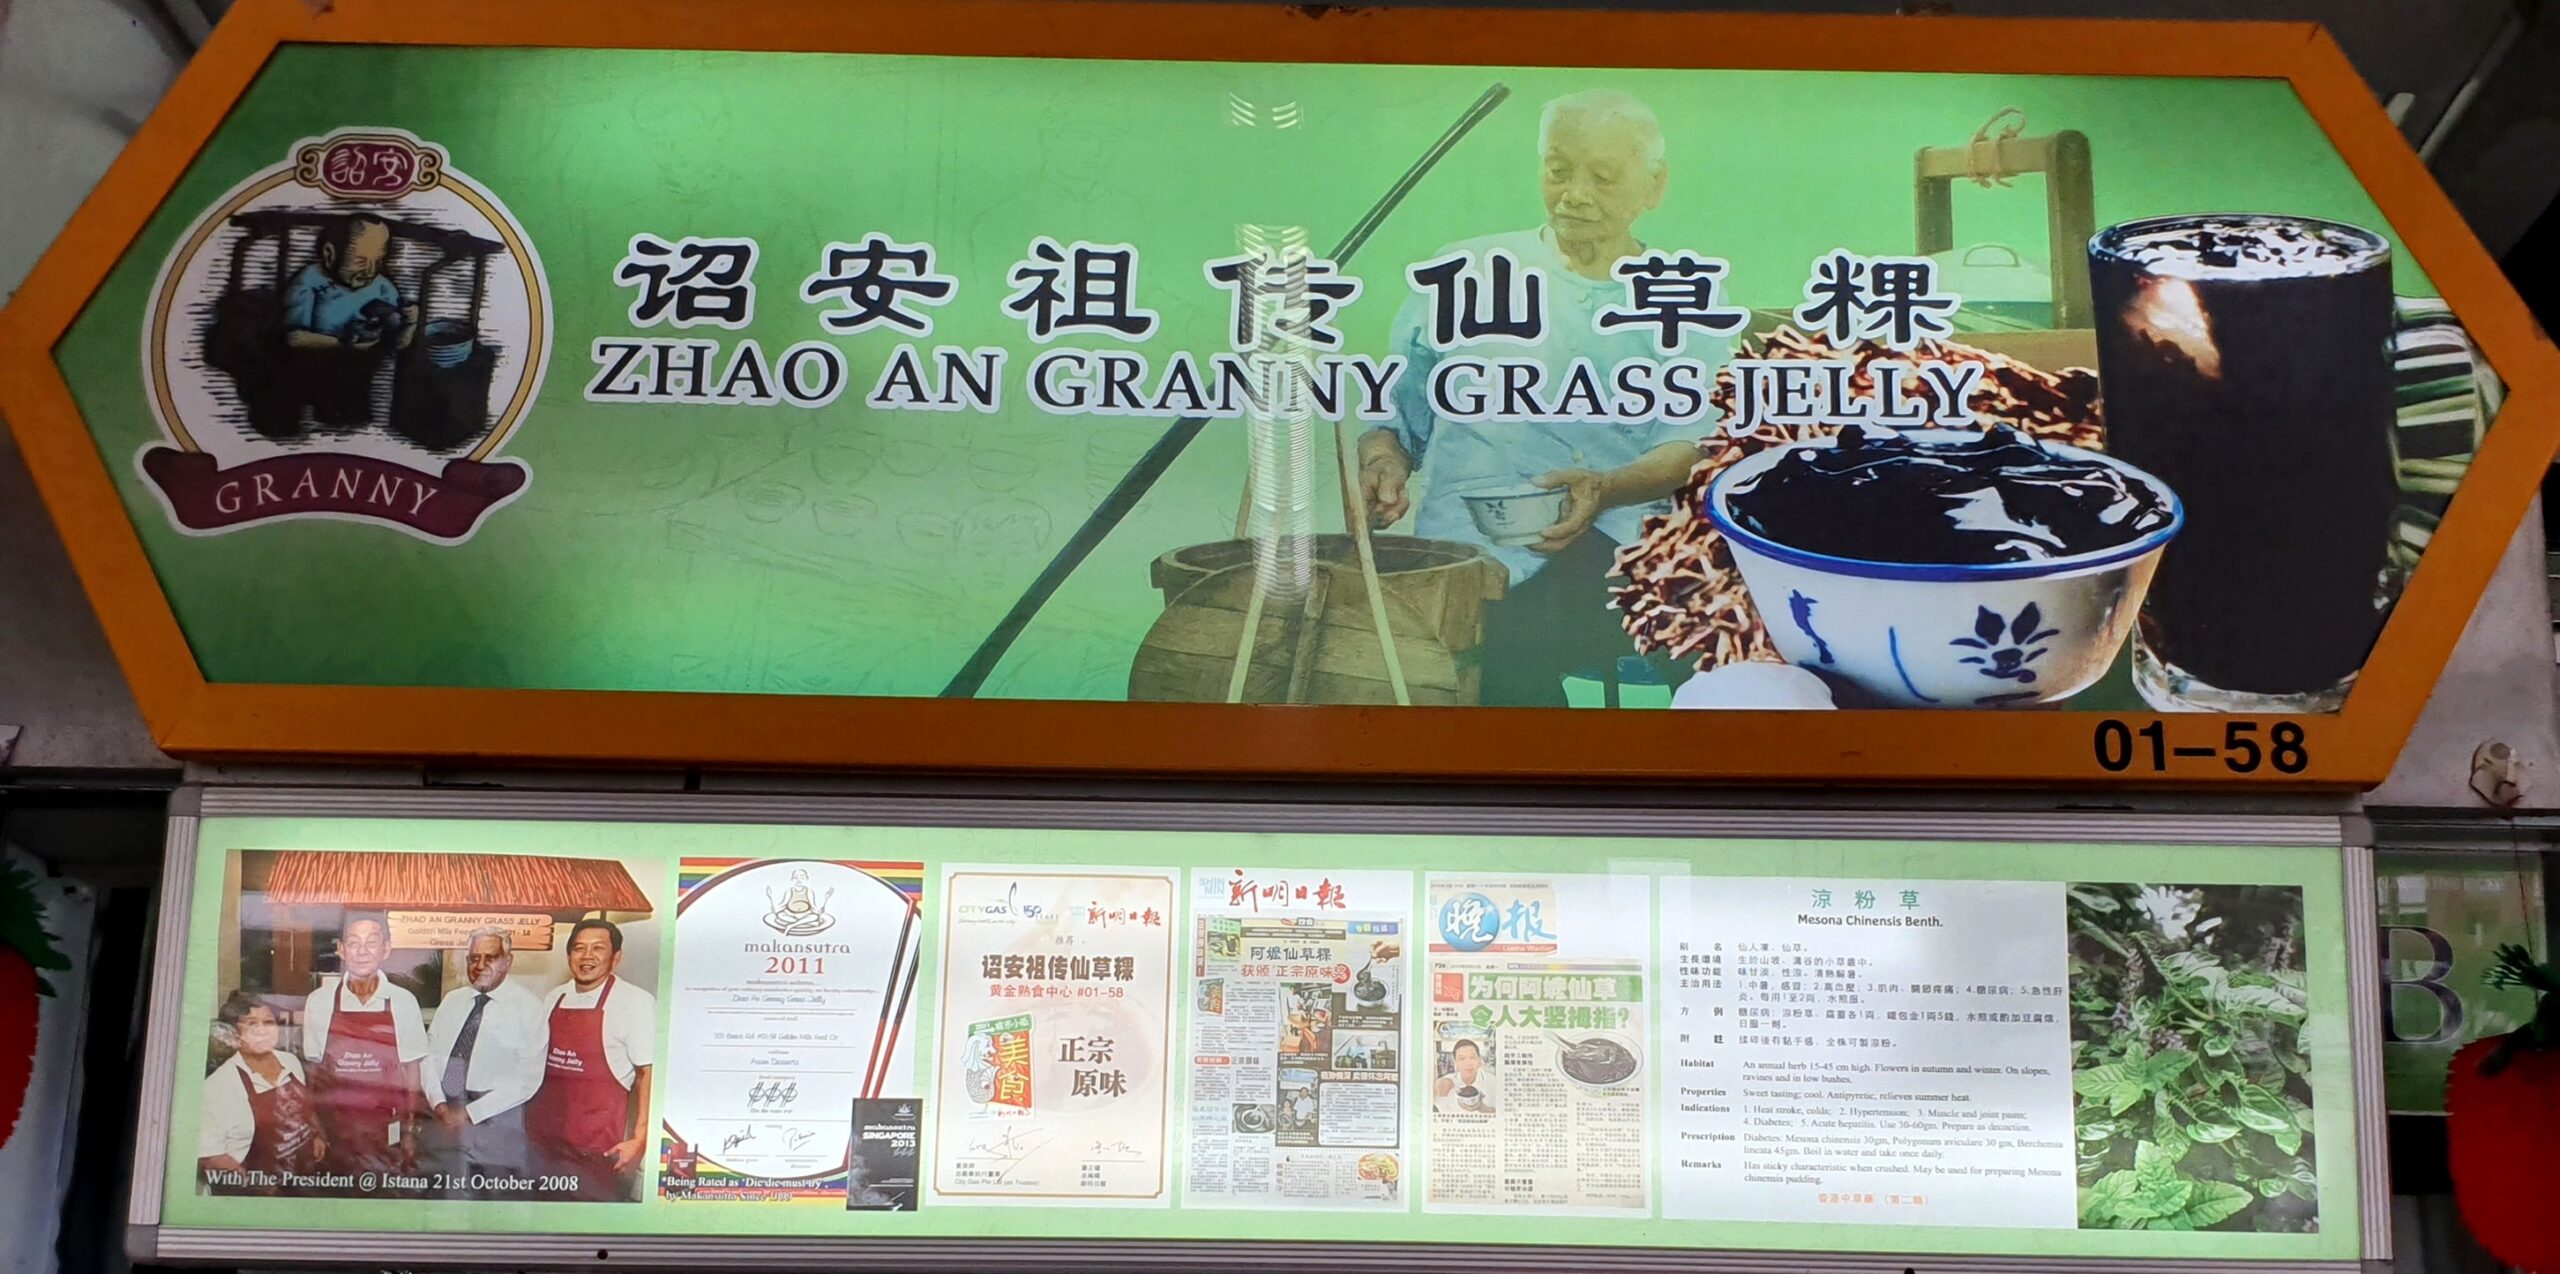 zhao an granny grass jelly